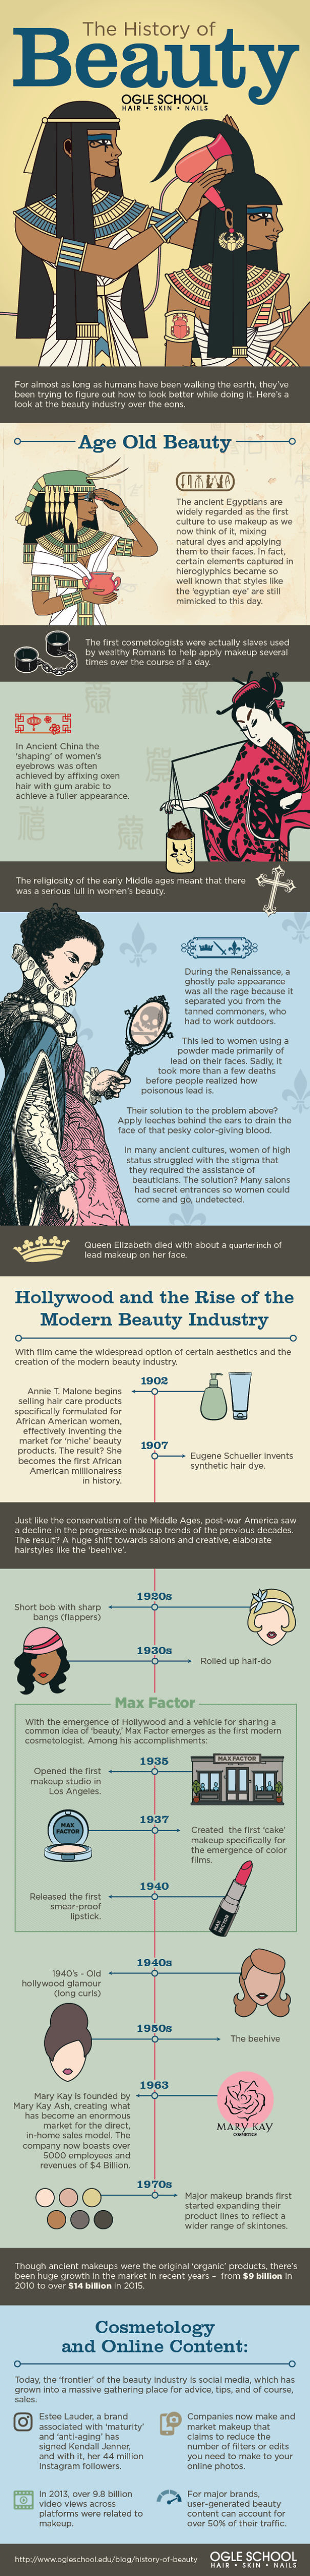 The Complete History Of Beauty